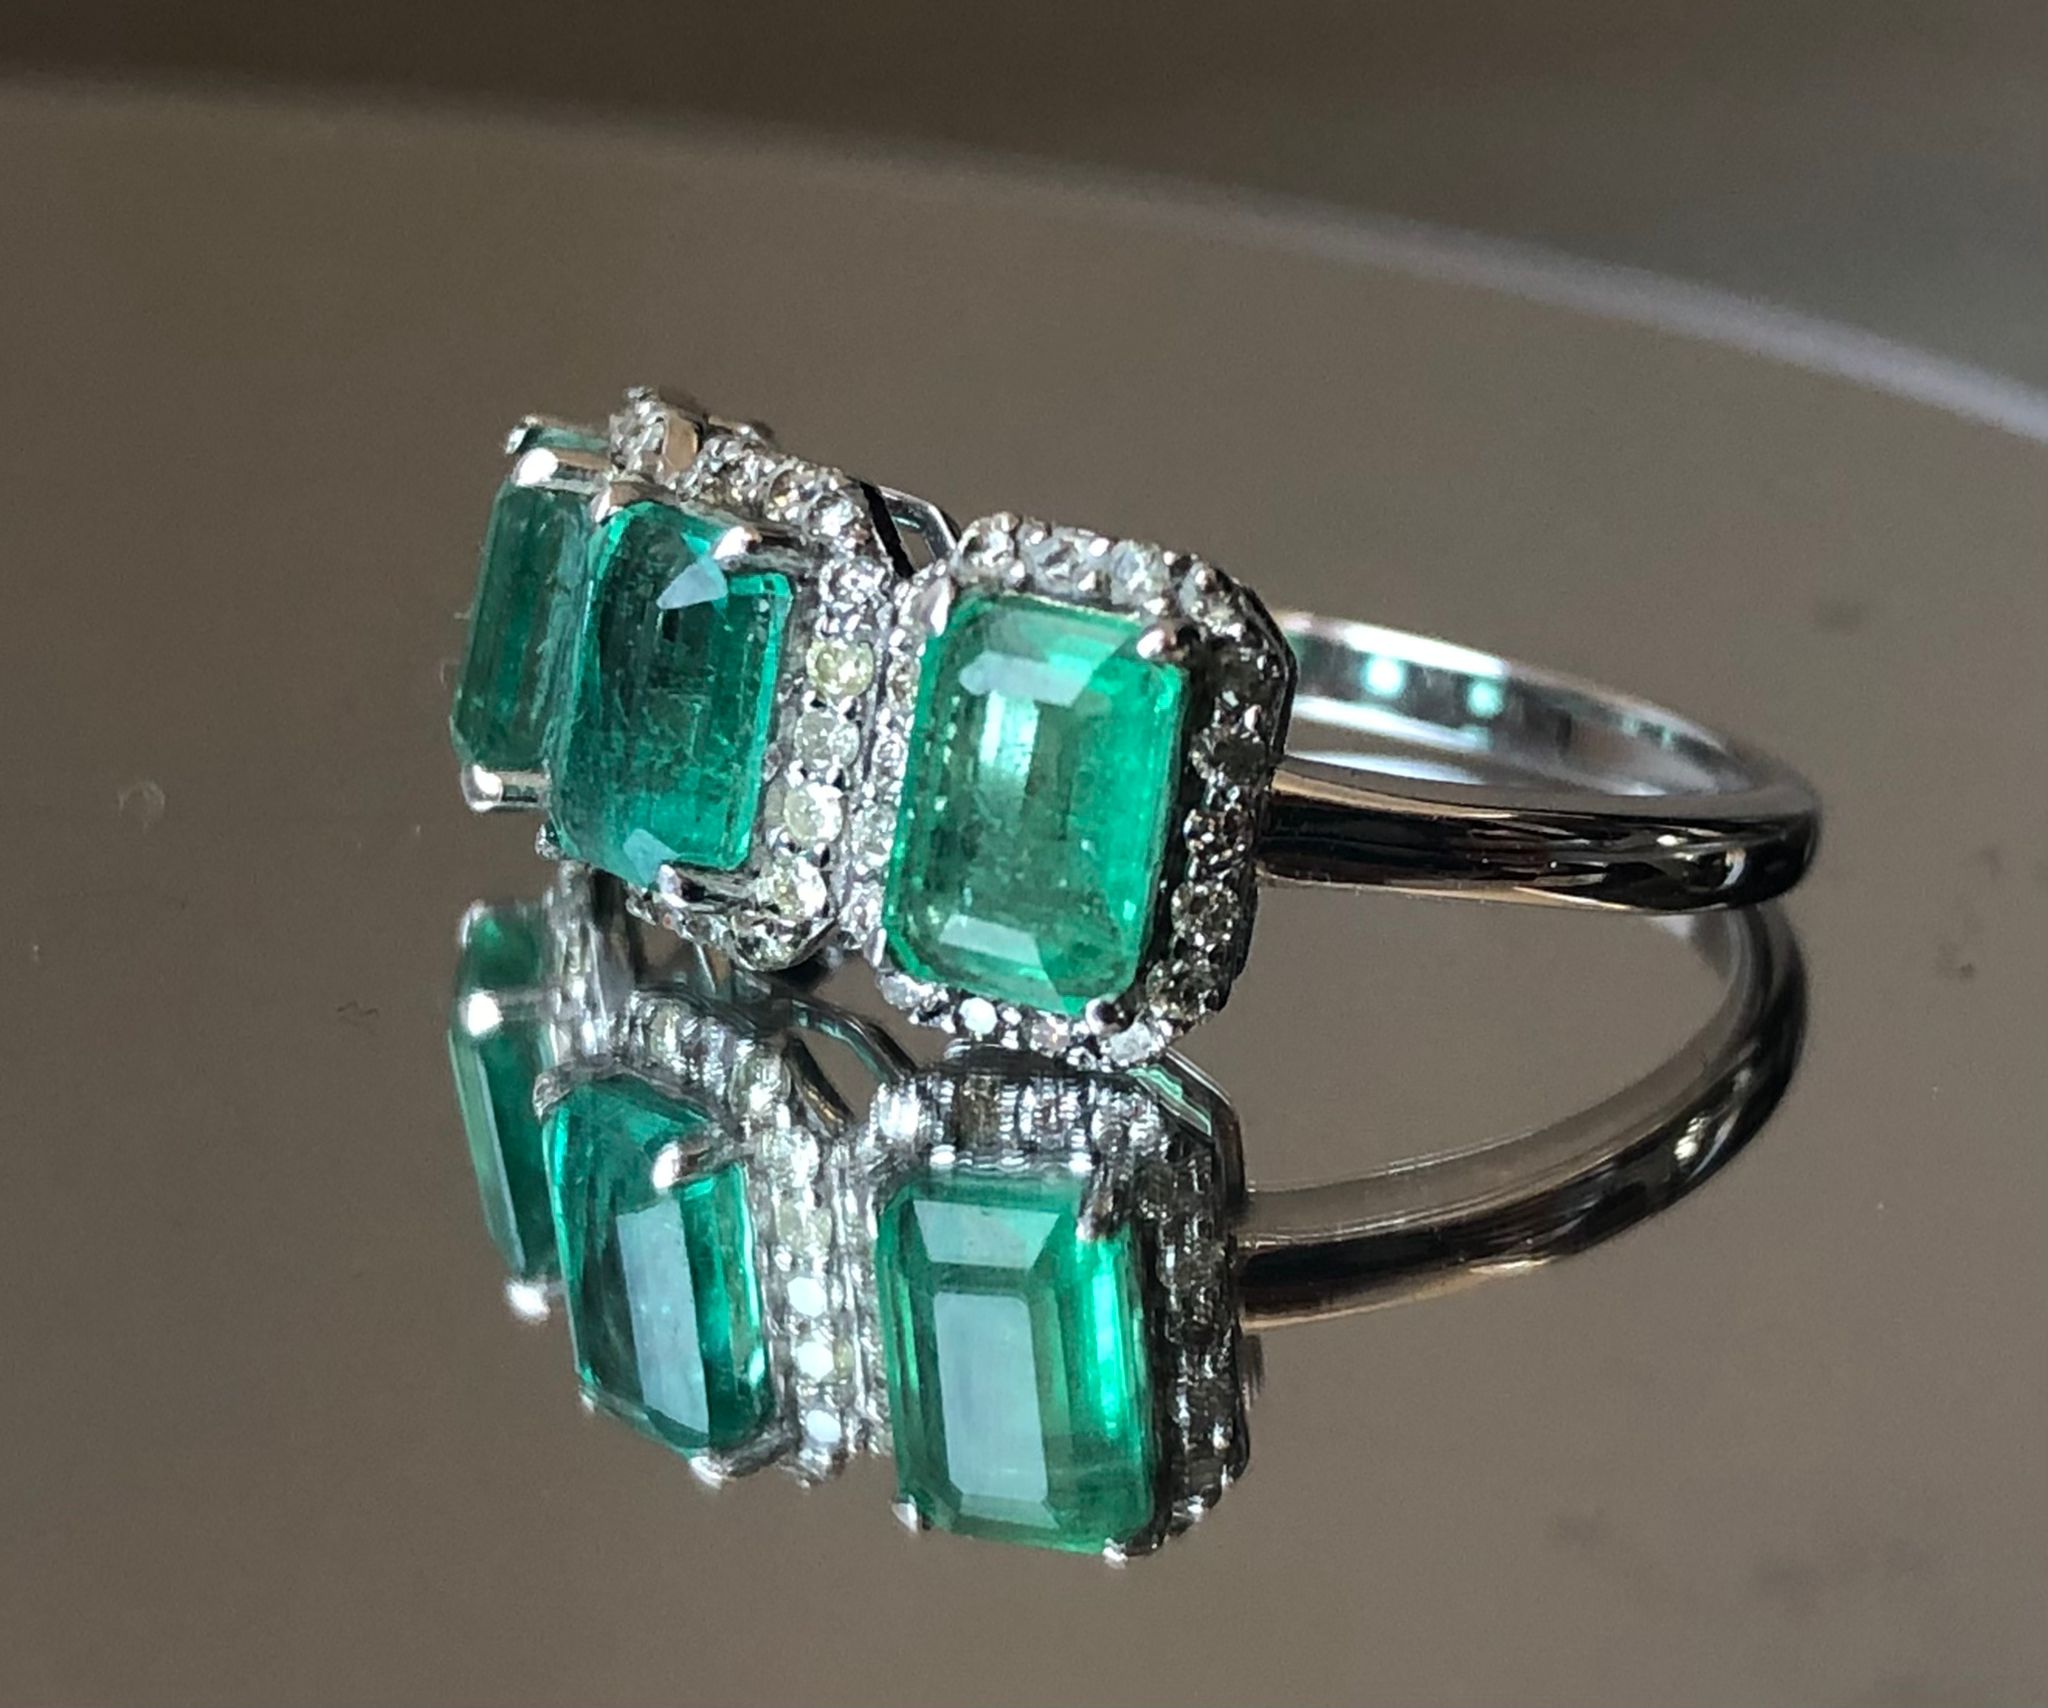 Beautiful Natural Emerald Ring With Natural Diamonds And 18k Gold - Image 2 of 8